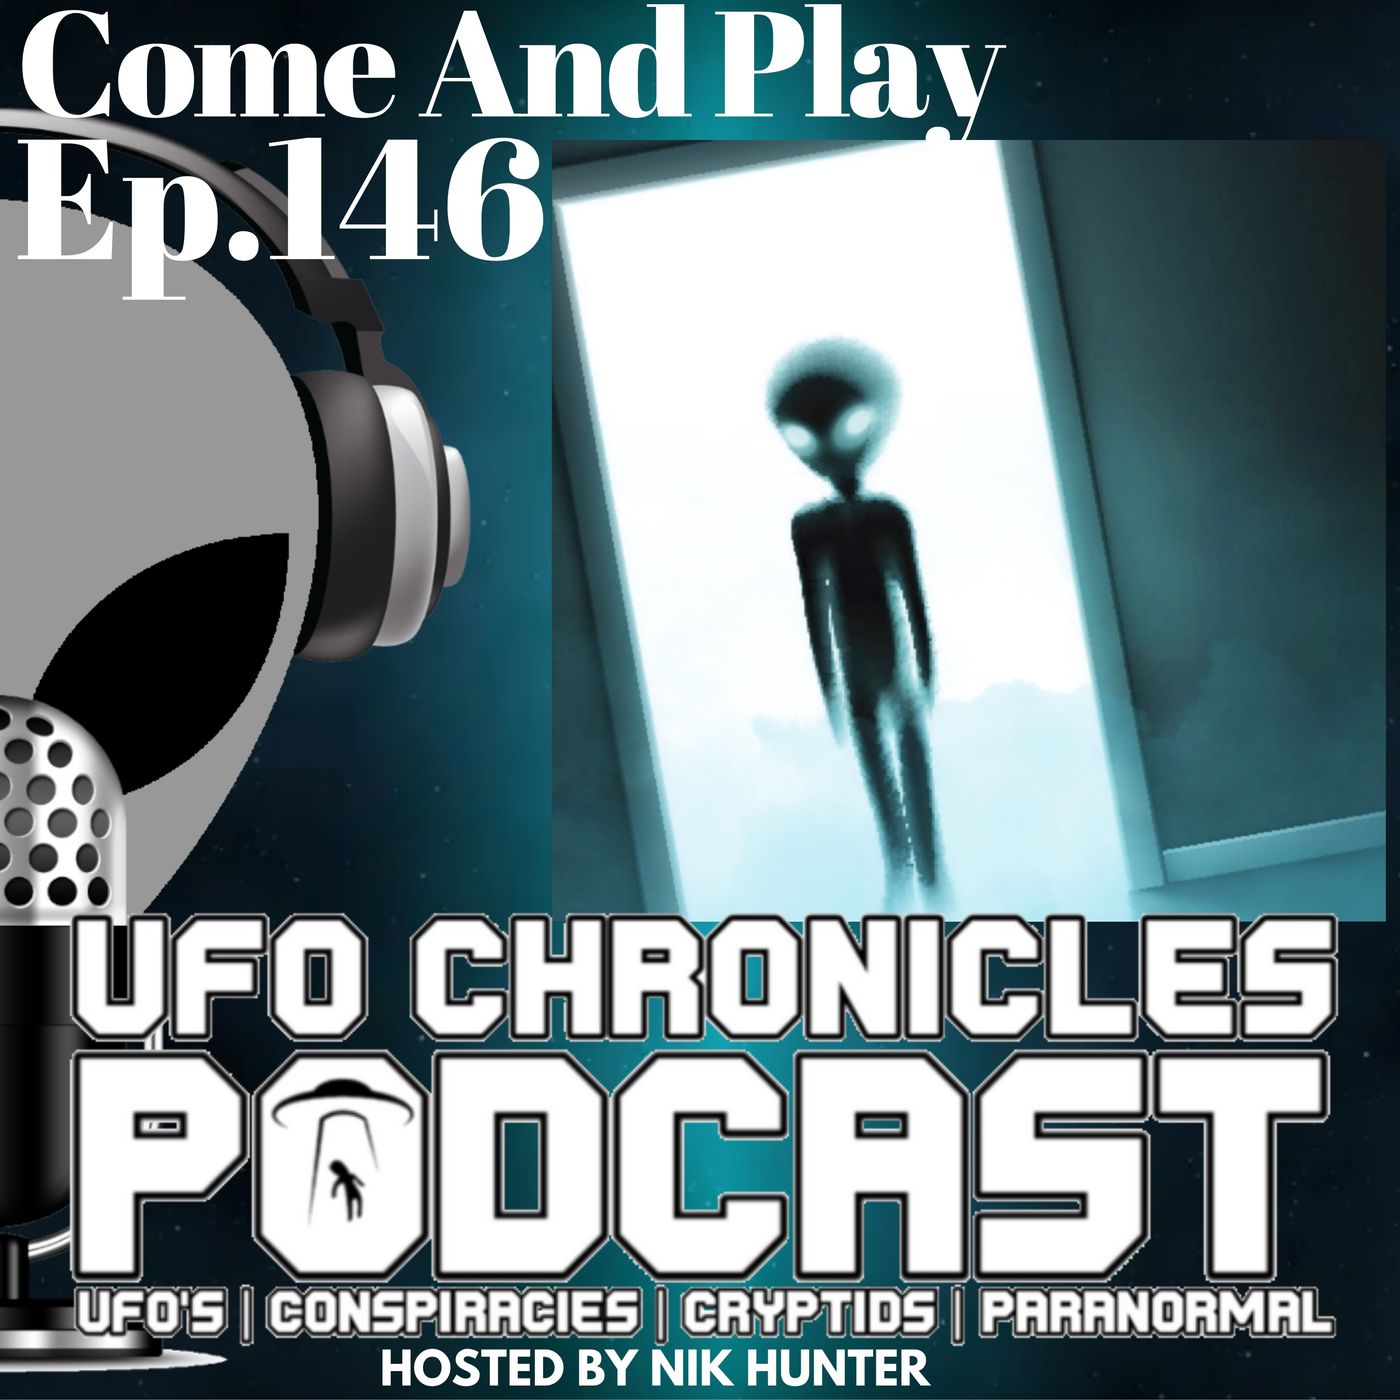 Ep.146 Come And Play (Throwback Thursday)